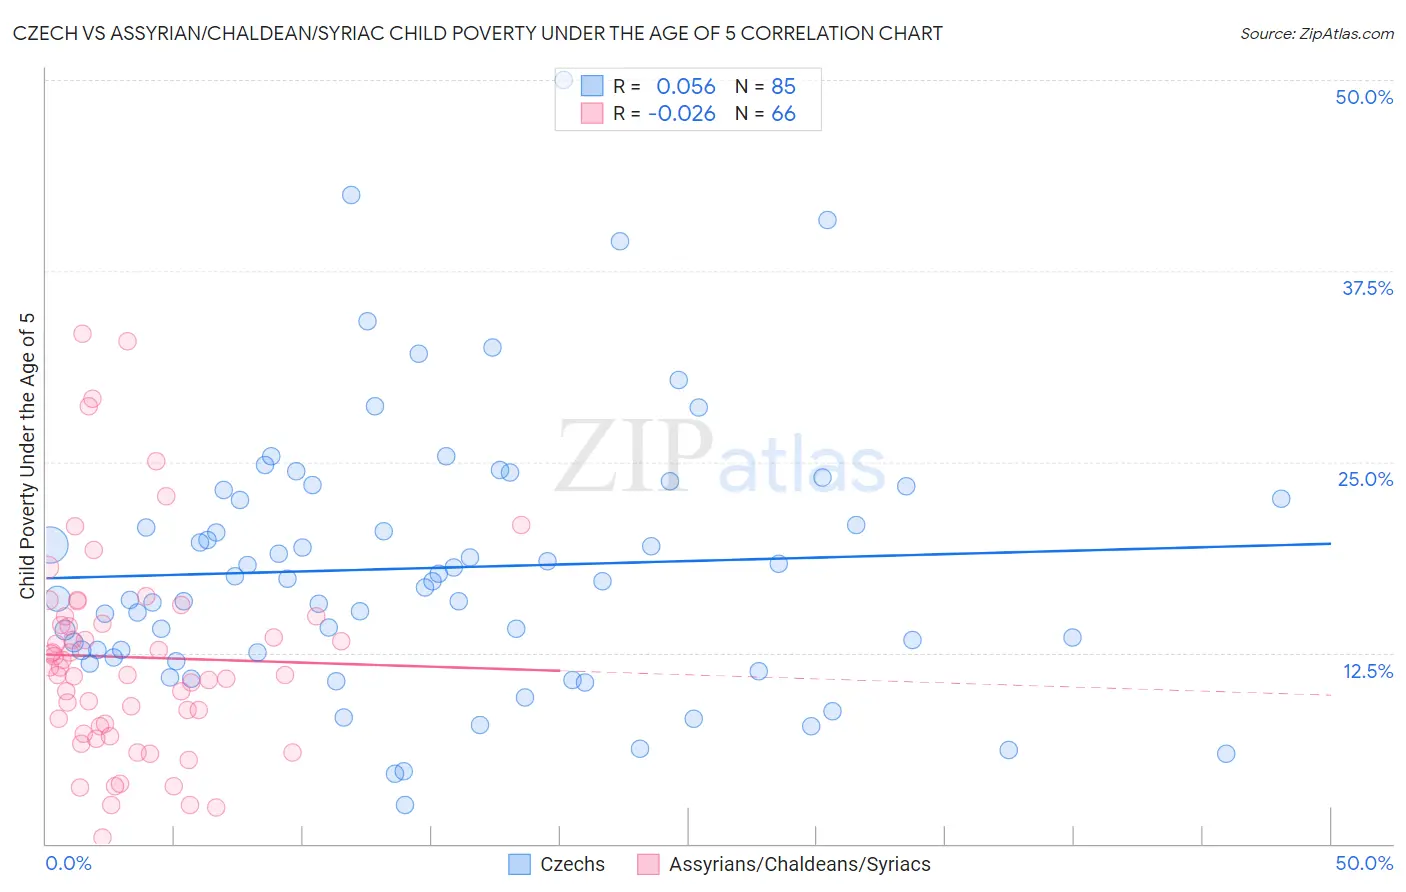 Czech vs Assyrian/Chaldean/Syriac Child Poverty Under the Age of 5